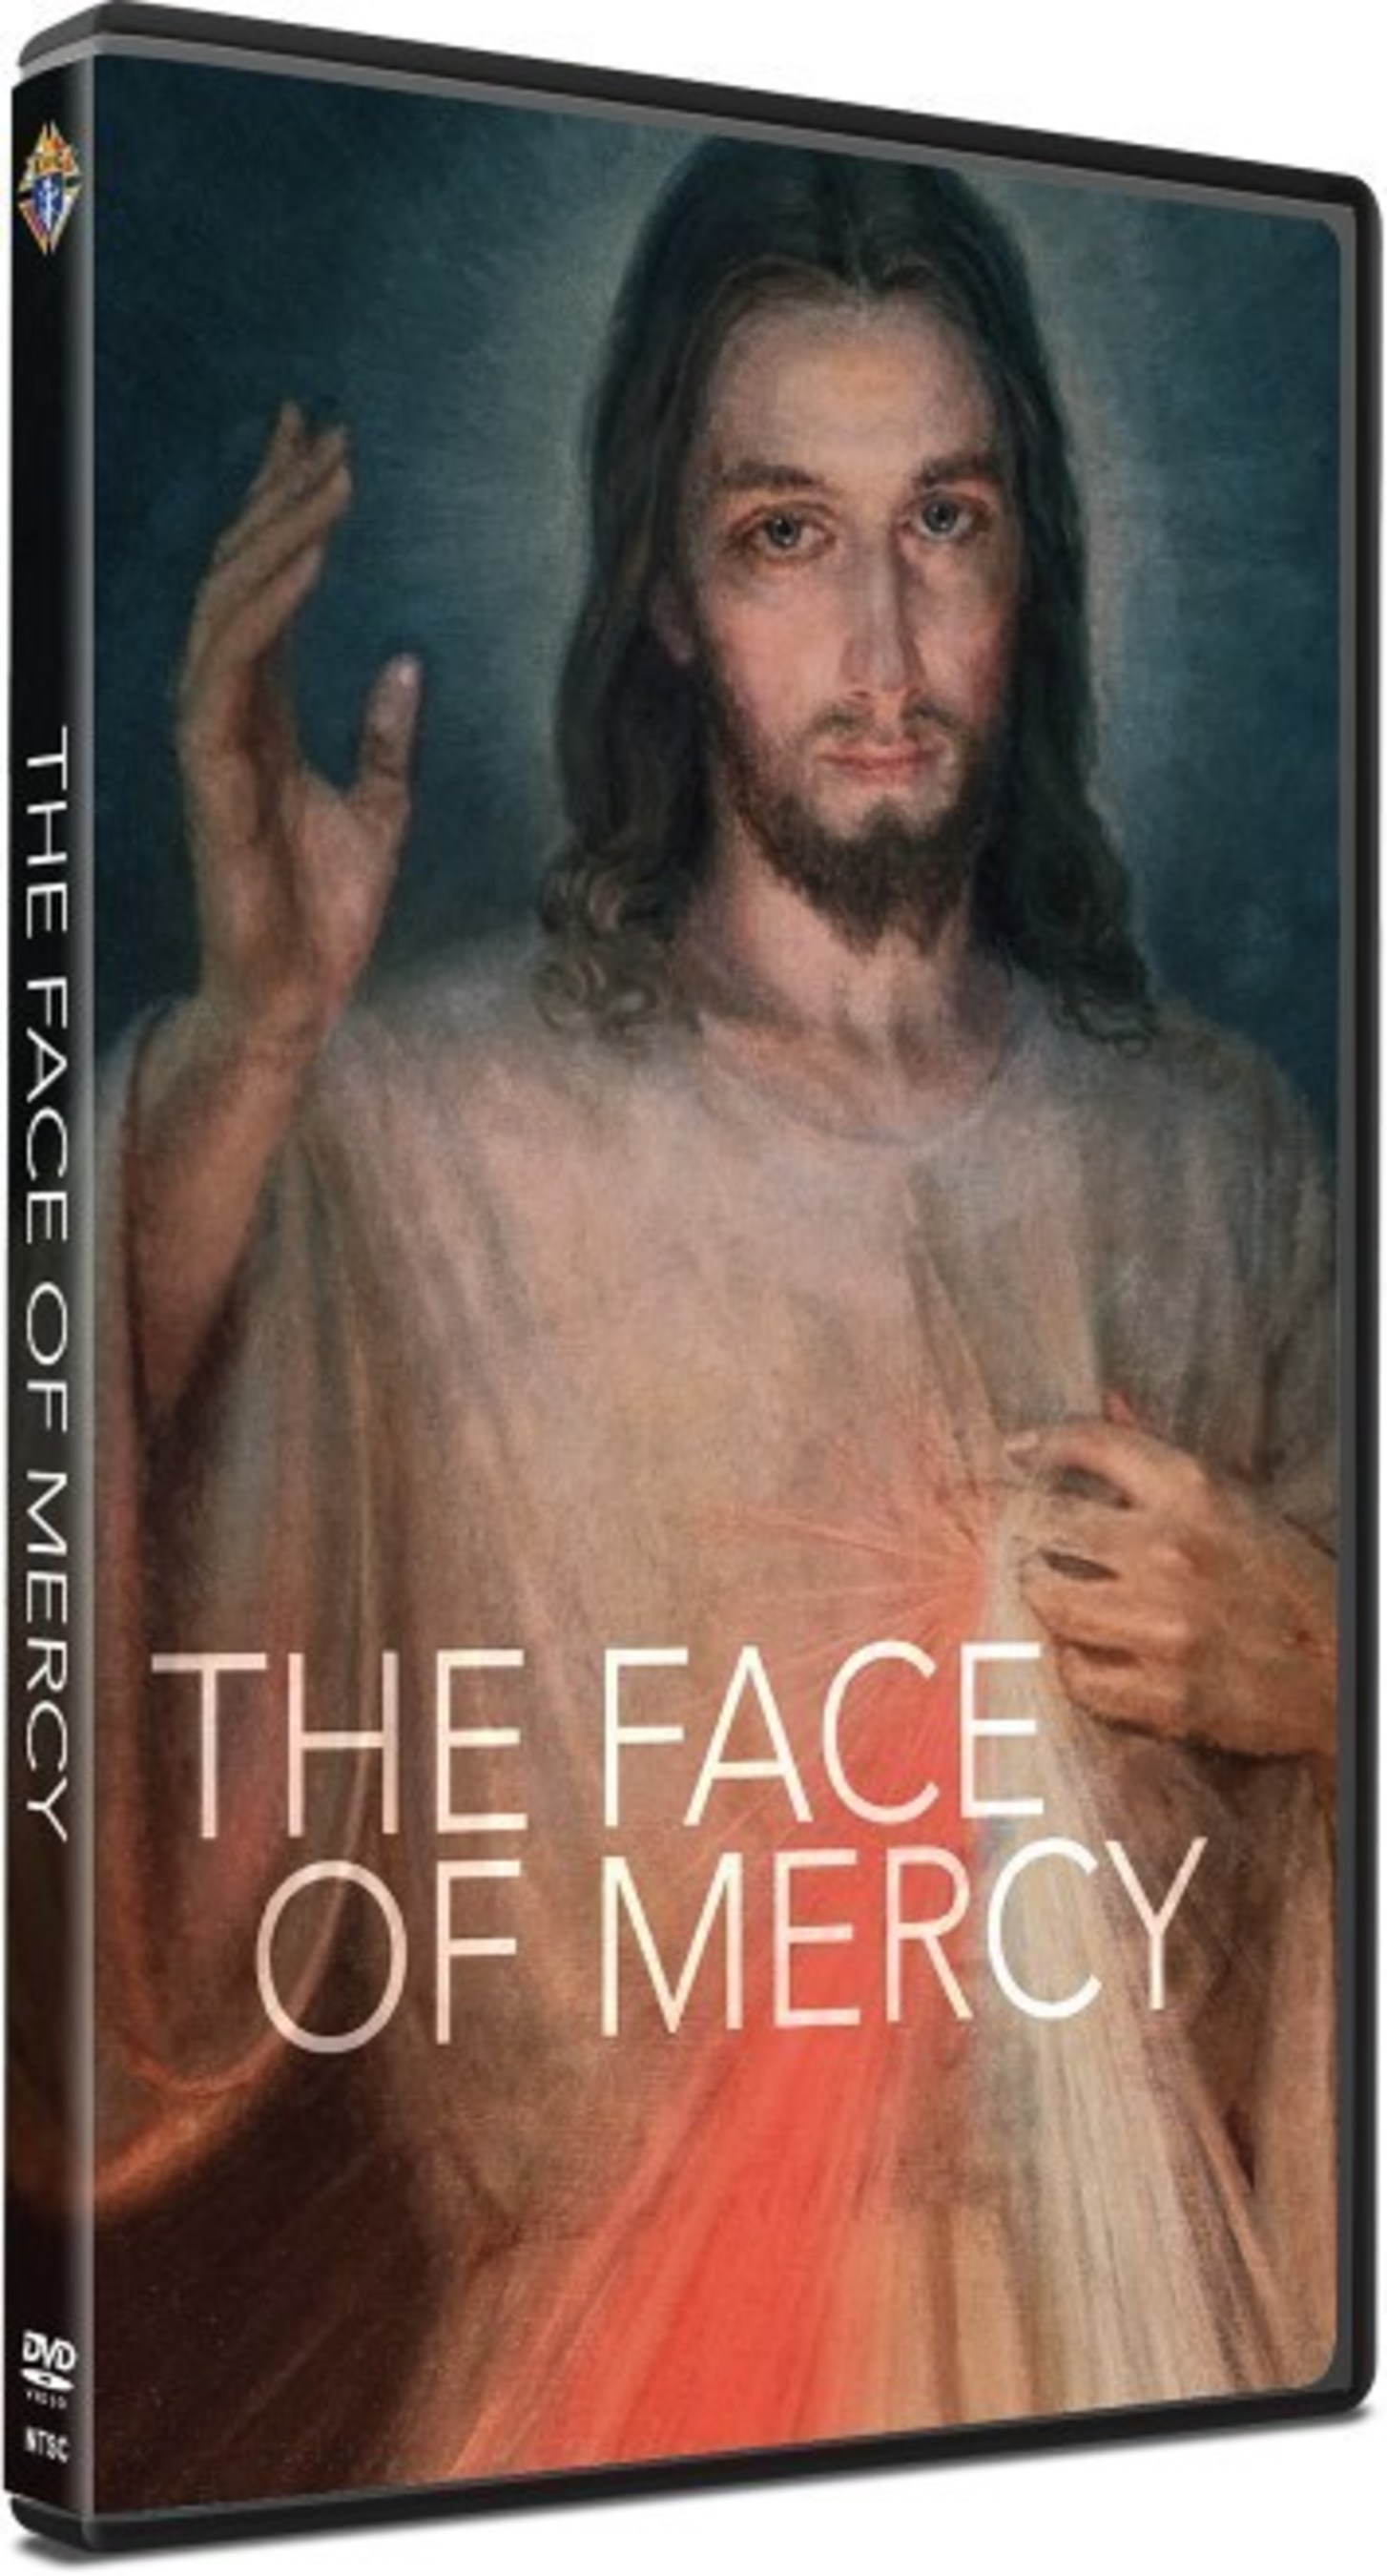 The Knights of Columbus documentary, "The Face of Mercy," depicts the image of Jesus as he appeared to a Polish nun in the 1930s, calling the world to trust in his mercy no matter how difficult the situation.